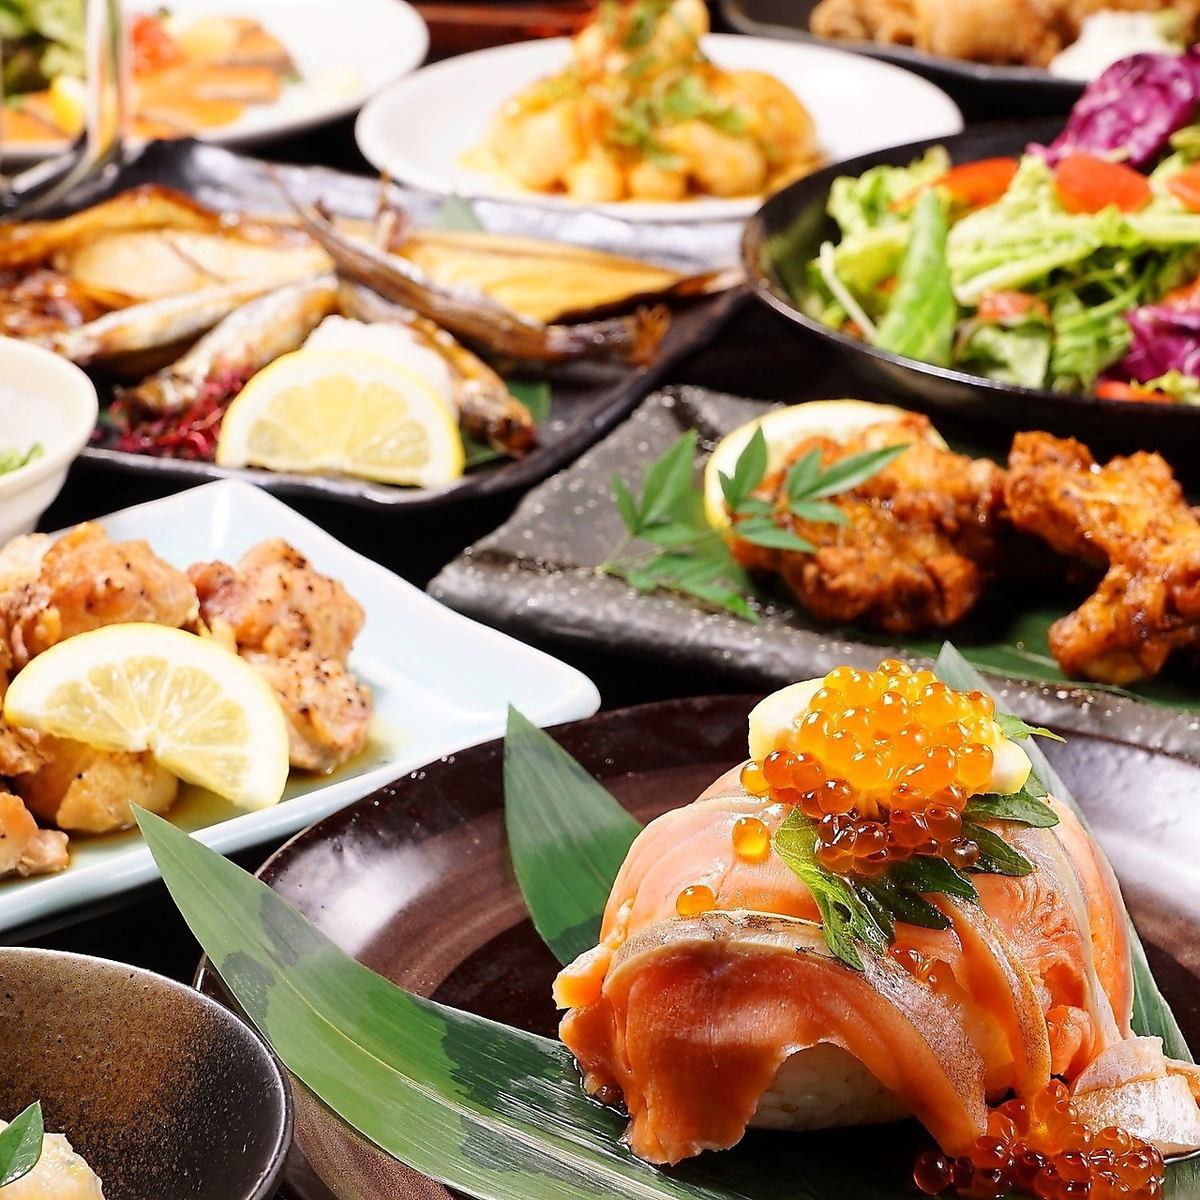 An izakaya with private rooms popular for its all-you-can-eat options! It's right next to Tennoji and Abeno Stations! 3,500 JPY (incl. tax) for 2 hours for 2 to 120 people